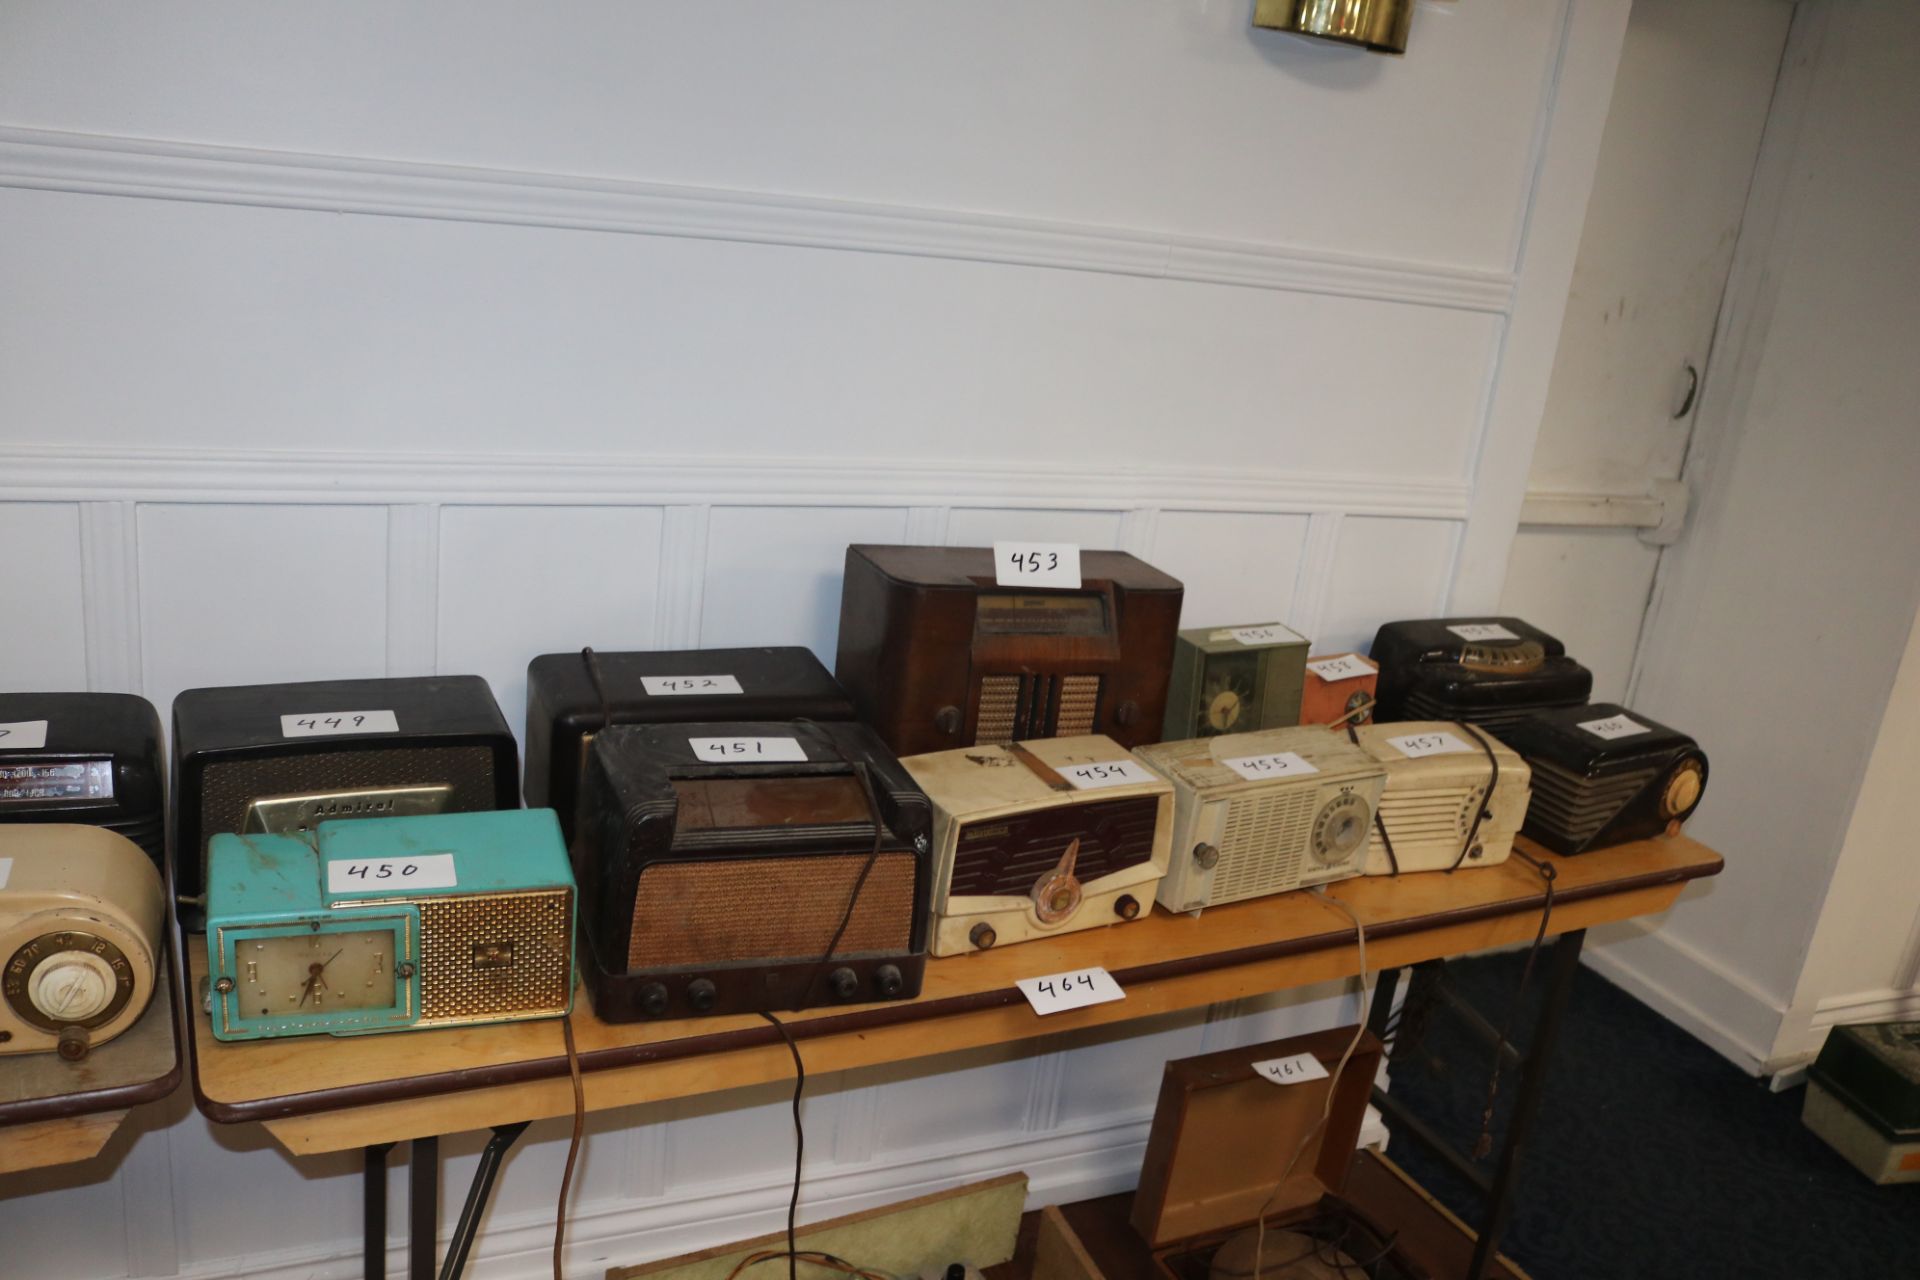 Lot misc antique radios (approx 40pcs) w/ extra tubes & portable turntable - Image 3 of 5